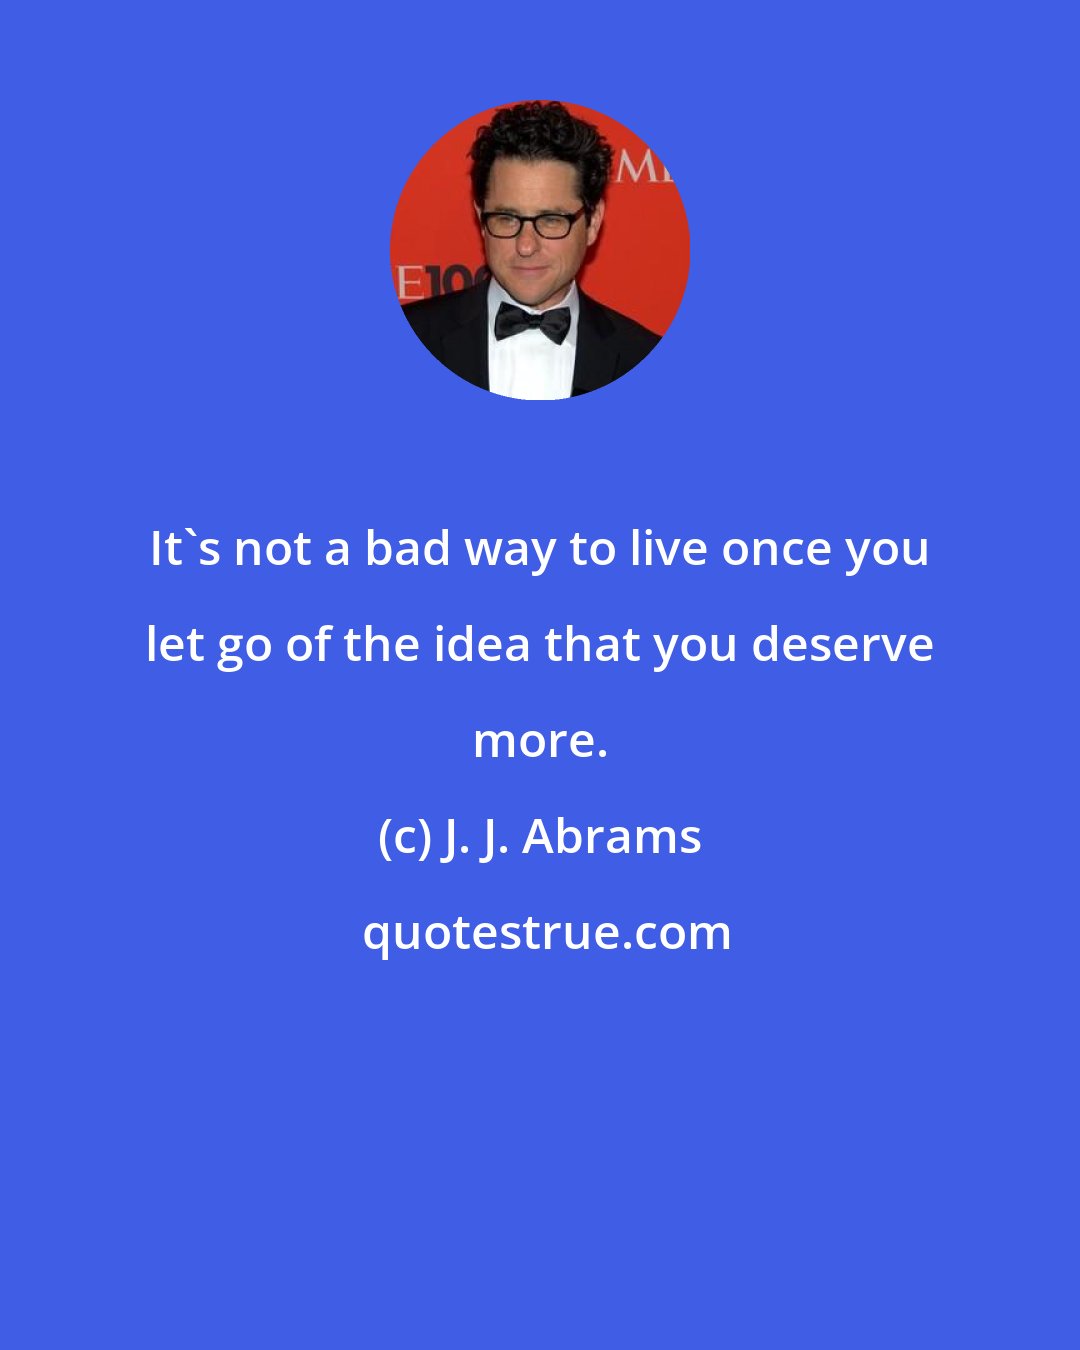 J. J. Abrams: It's not a bad way to live once you let go of the idea that you deserve more.